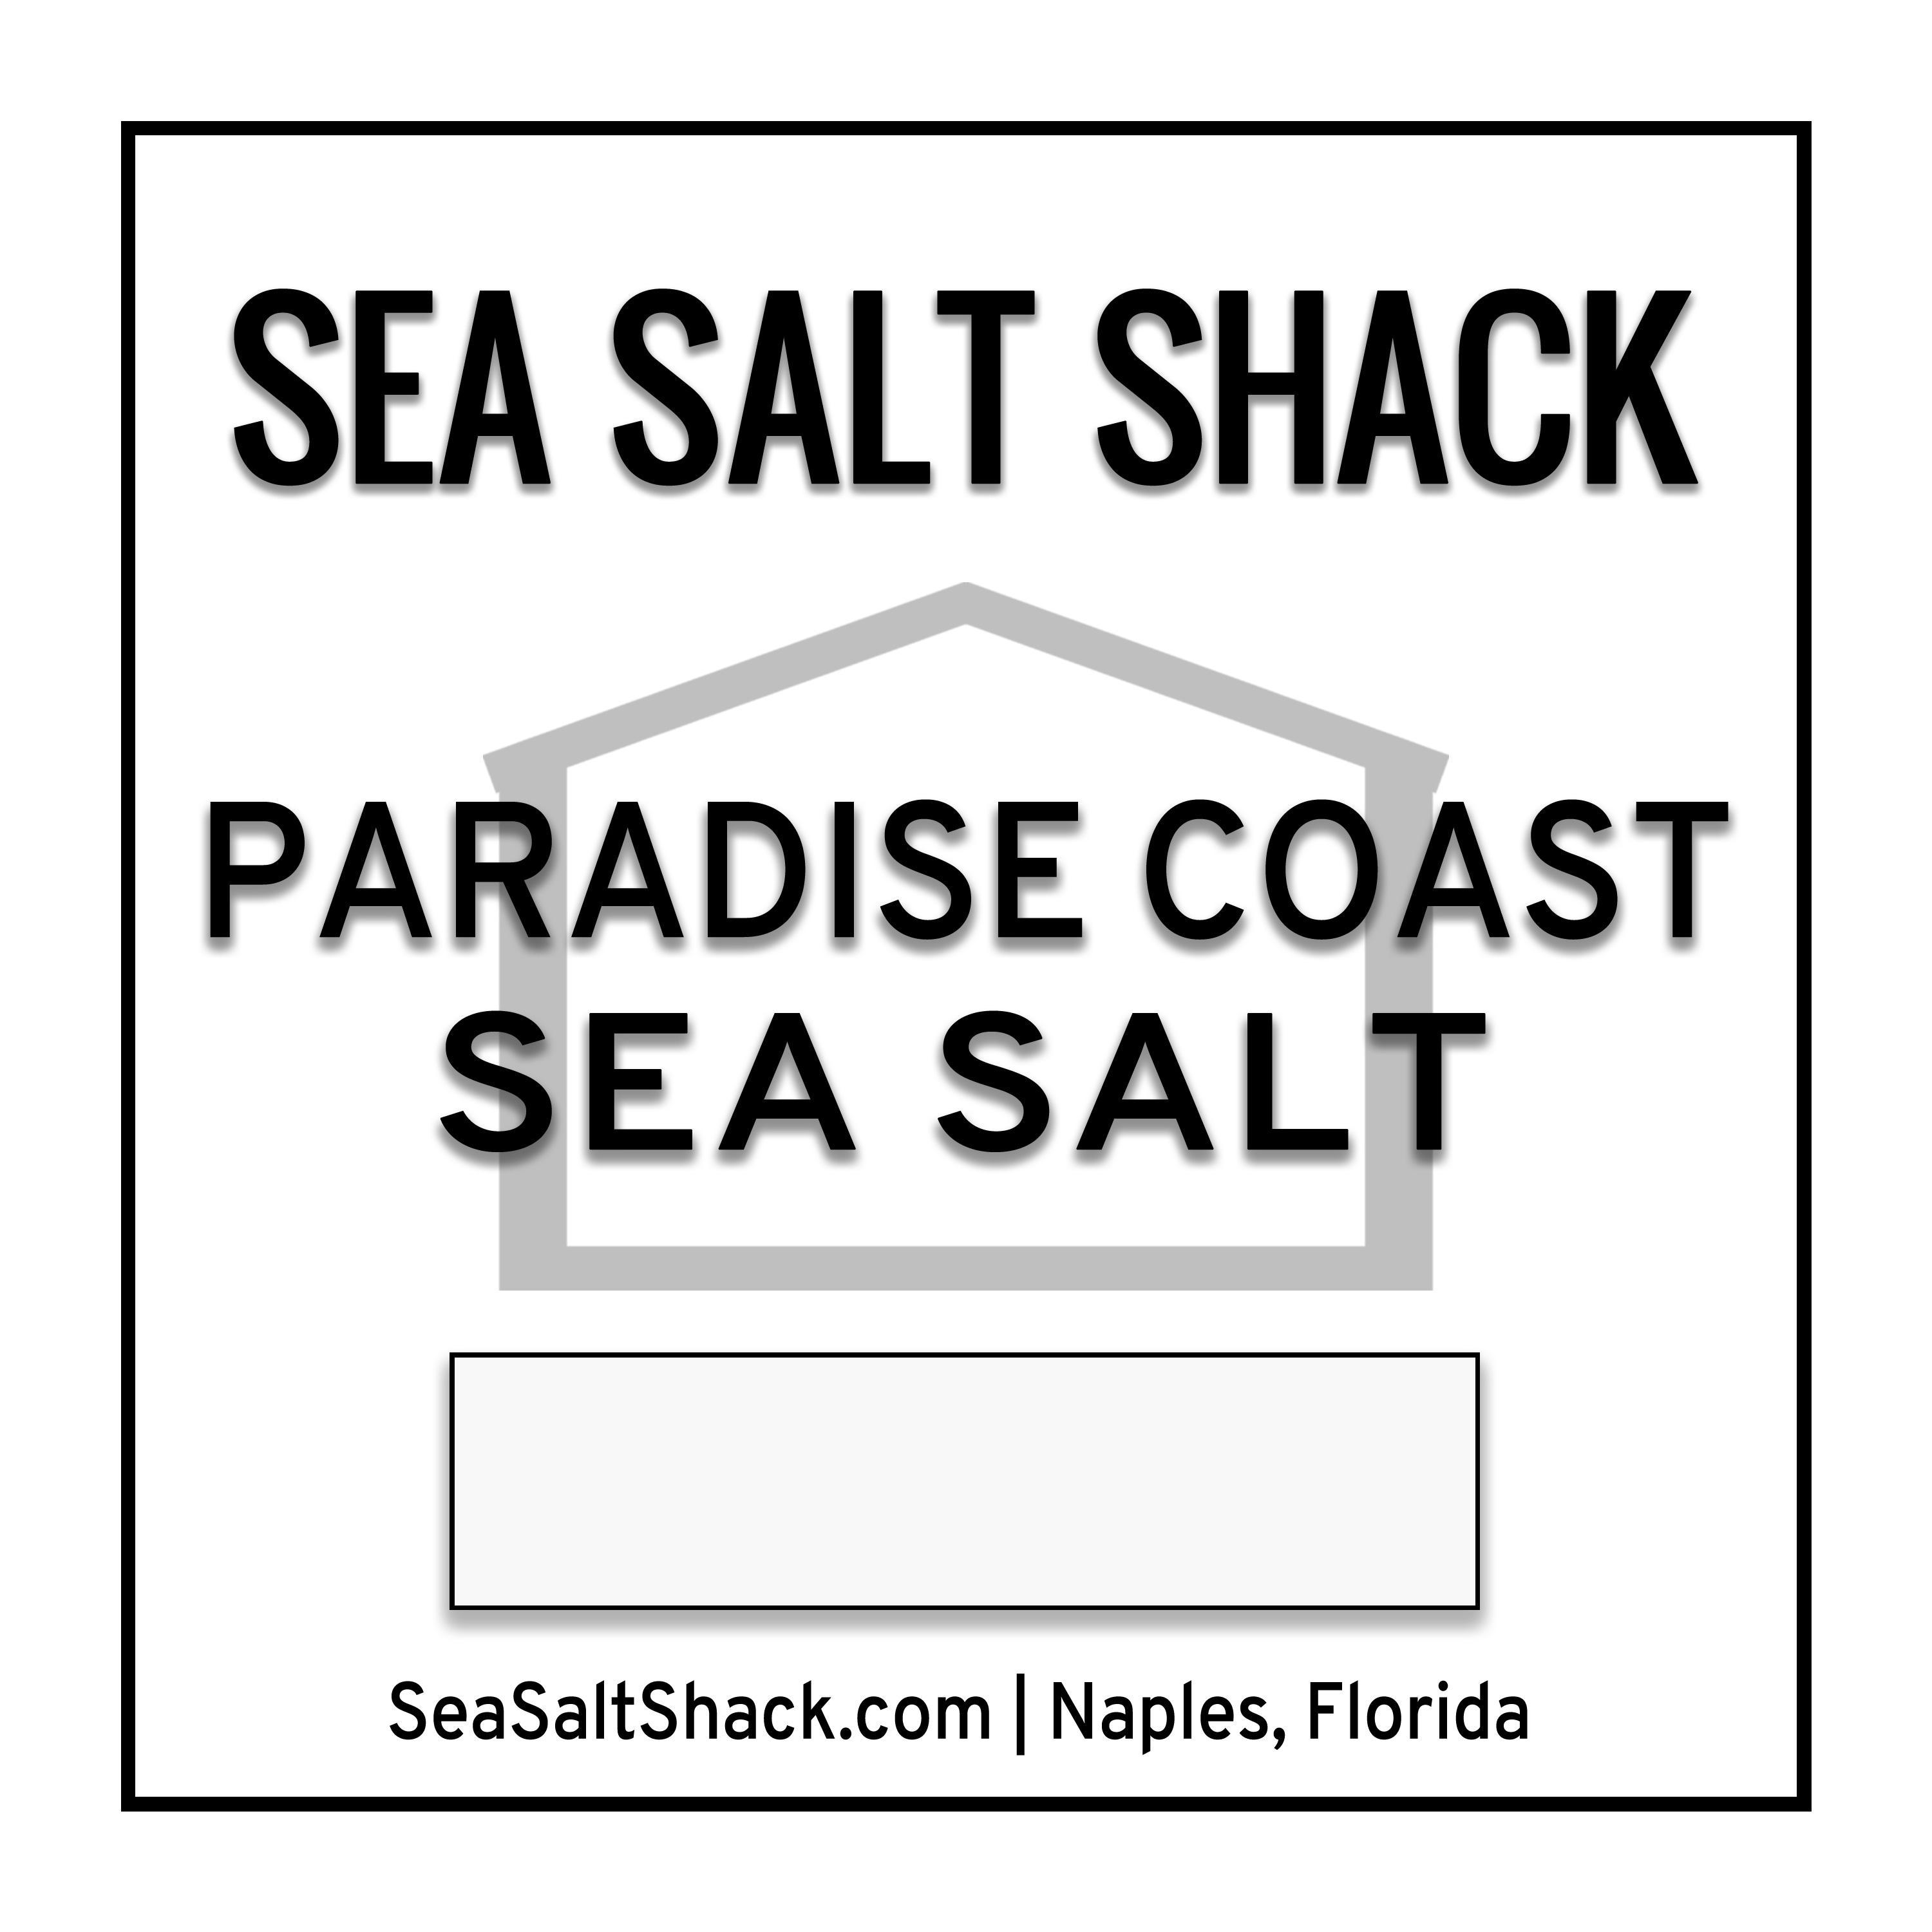 We are Sea Salt Shack, bringing you fresh Gulf sea salt and the finest collection of classic and flavored sea salts from around the globe. #gourmet #seasalt